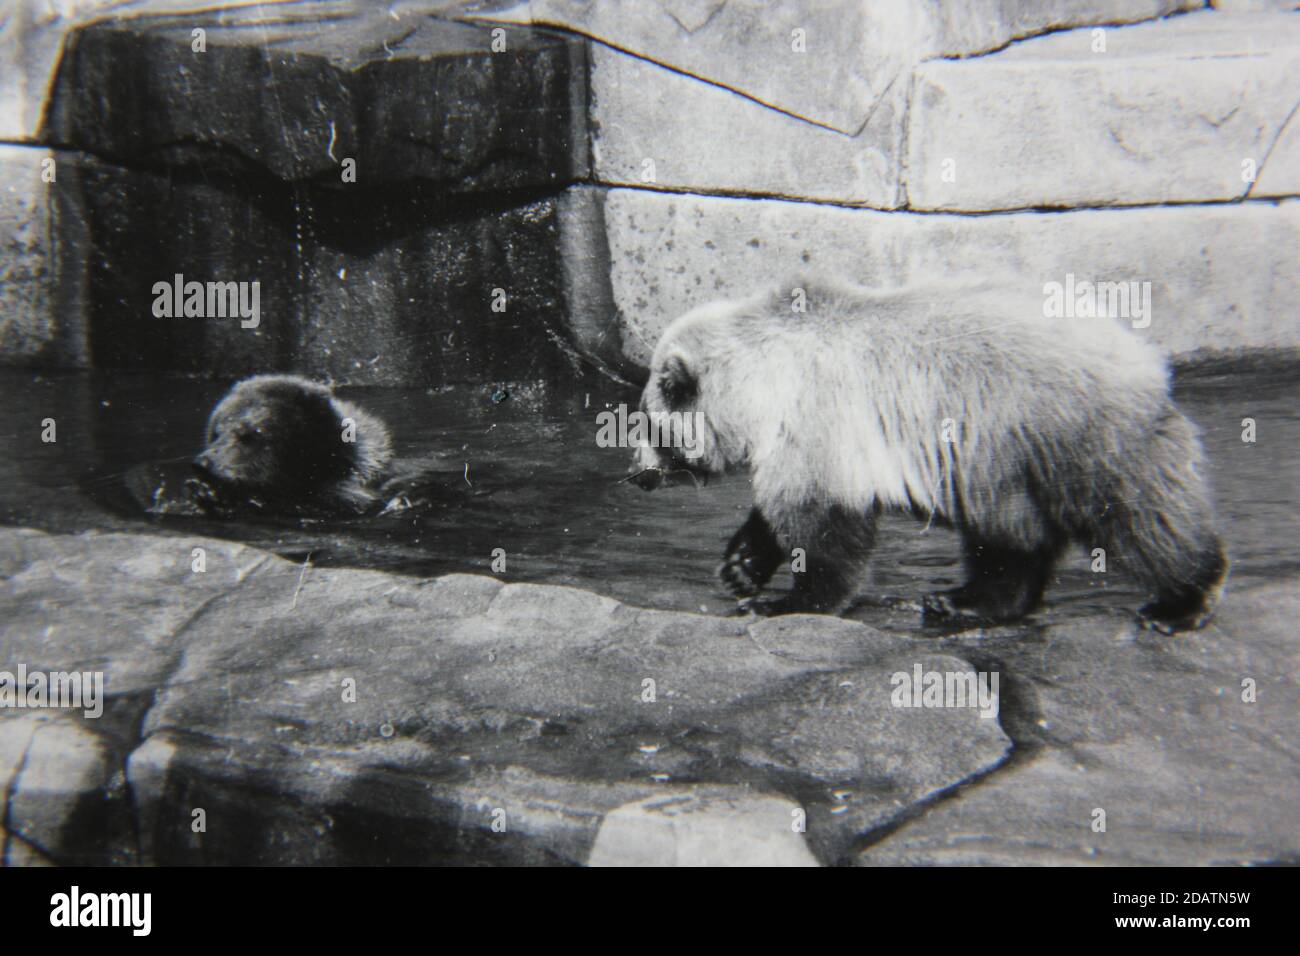 Fine 1970s vintage black and white photography of wild animals as seen in the zoo. Stock Photo